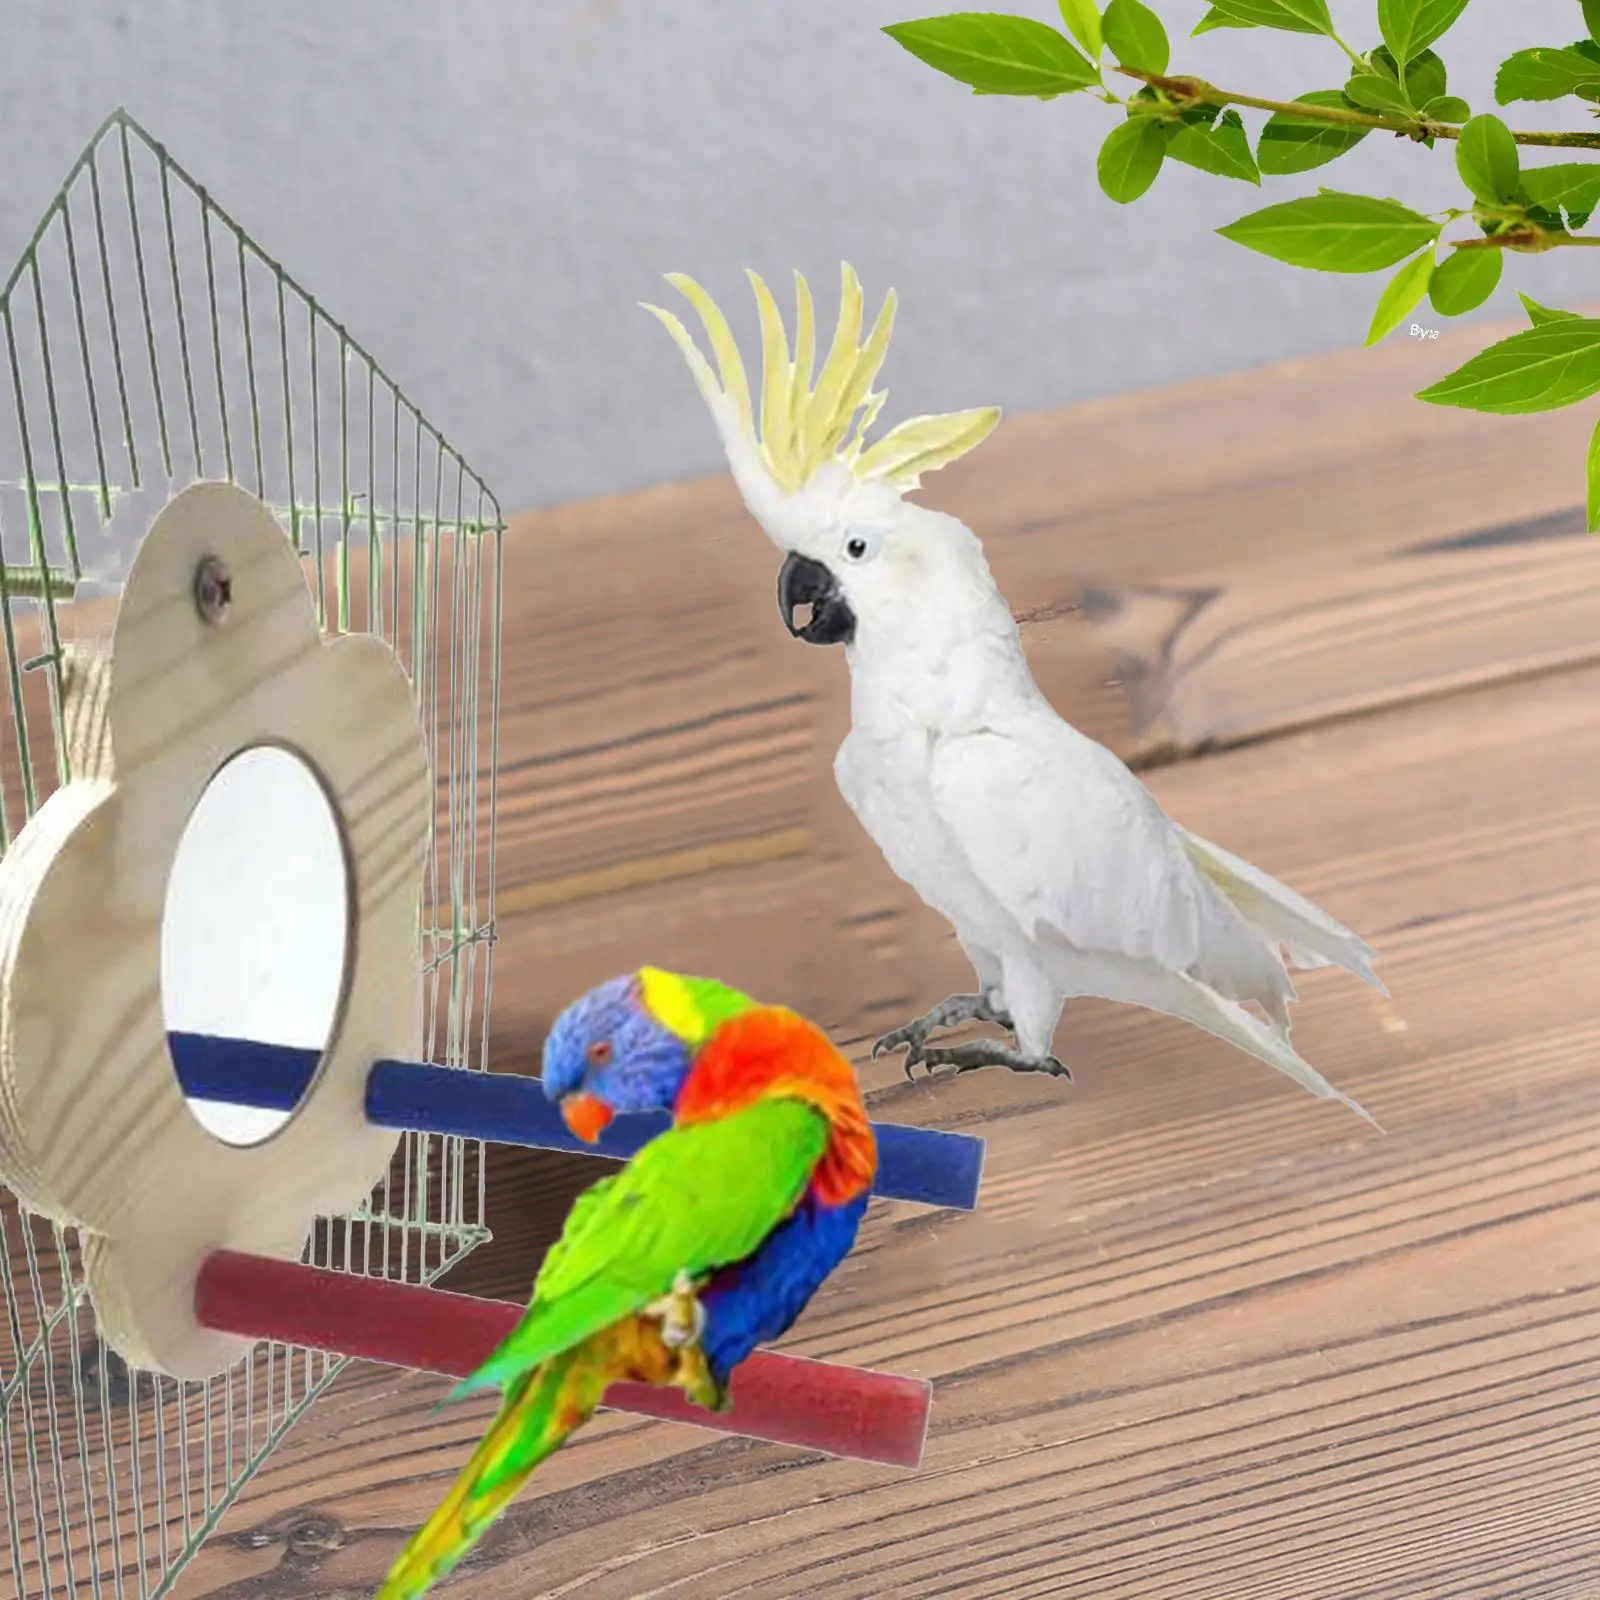 Parrot Mirror Perch for Bird Cage Parrot Paw Grinding Stick Playground Bird Cage Perch Sand for Cockatoo Finch Small Bird